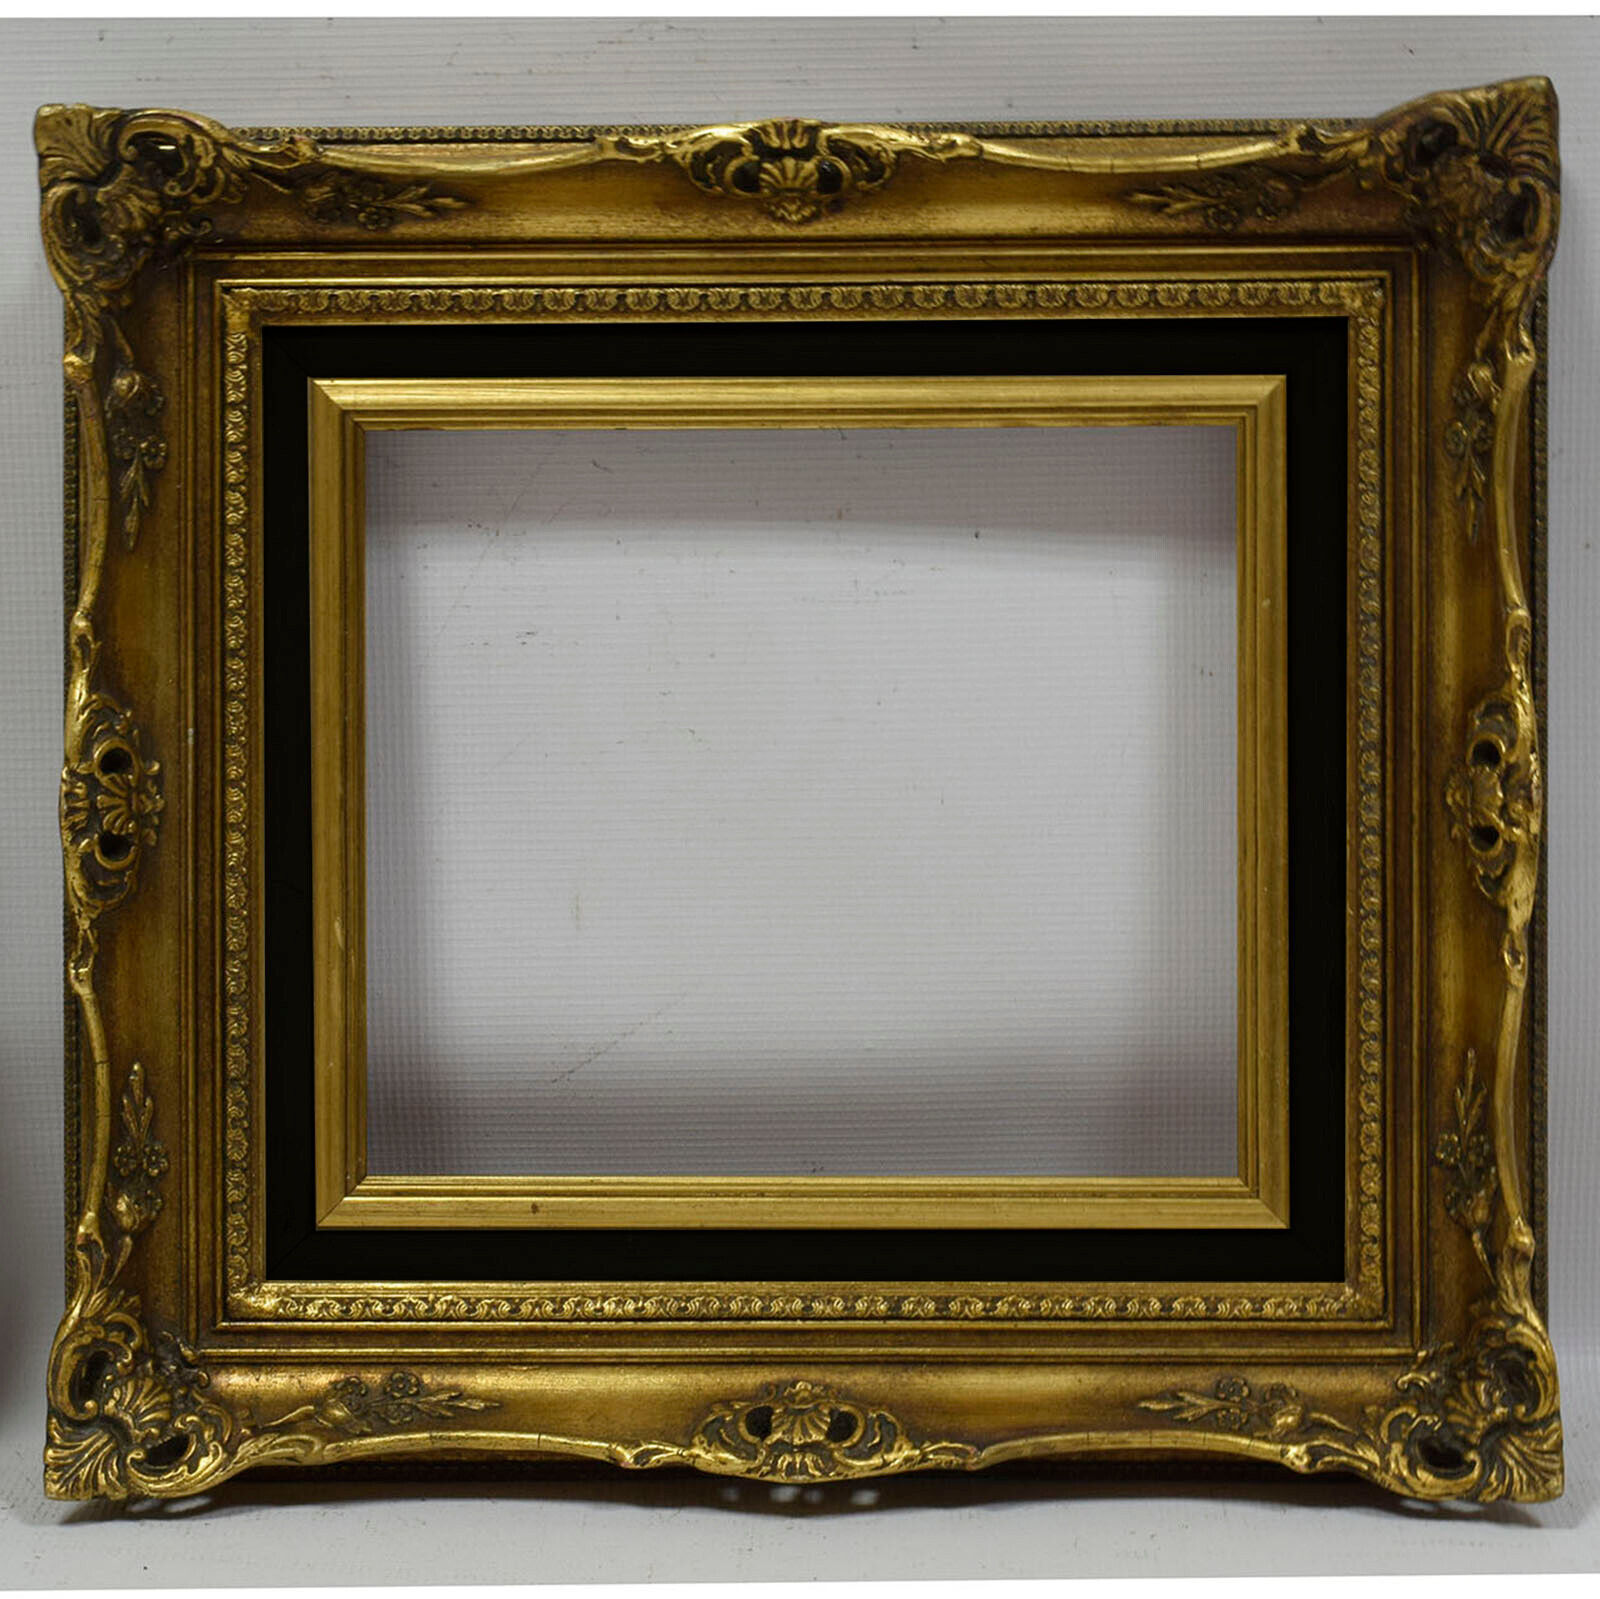 Ca.1950 Old wooden frame decorative Original condition Internal: 11x9,4 in